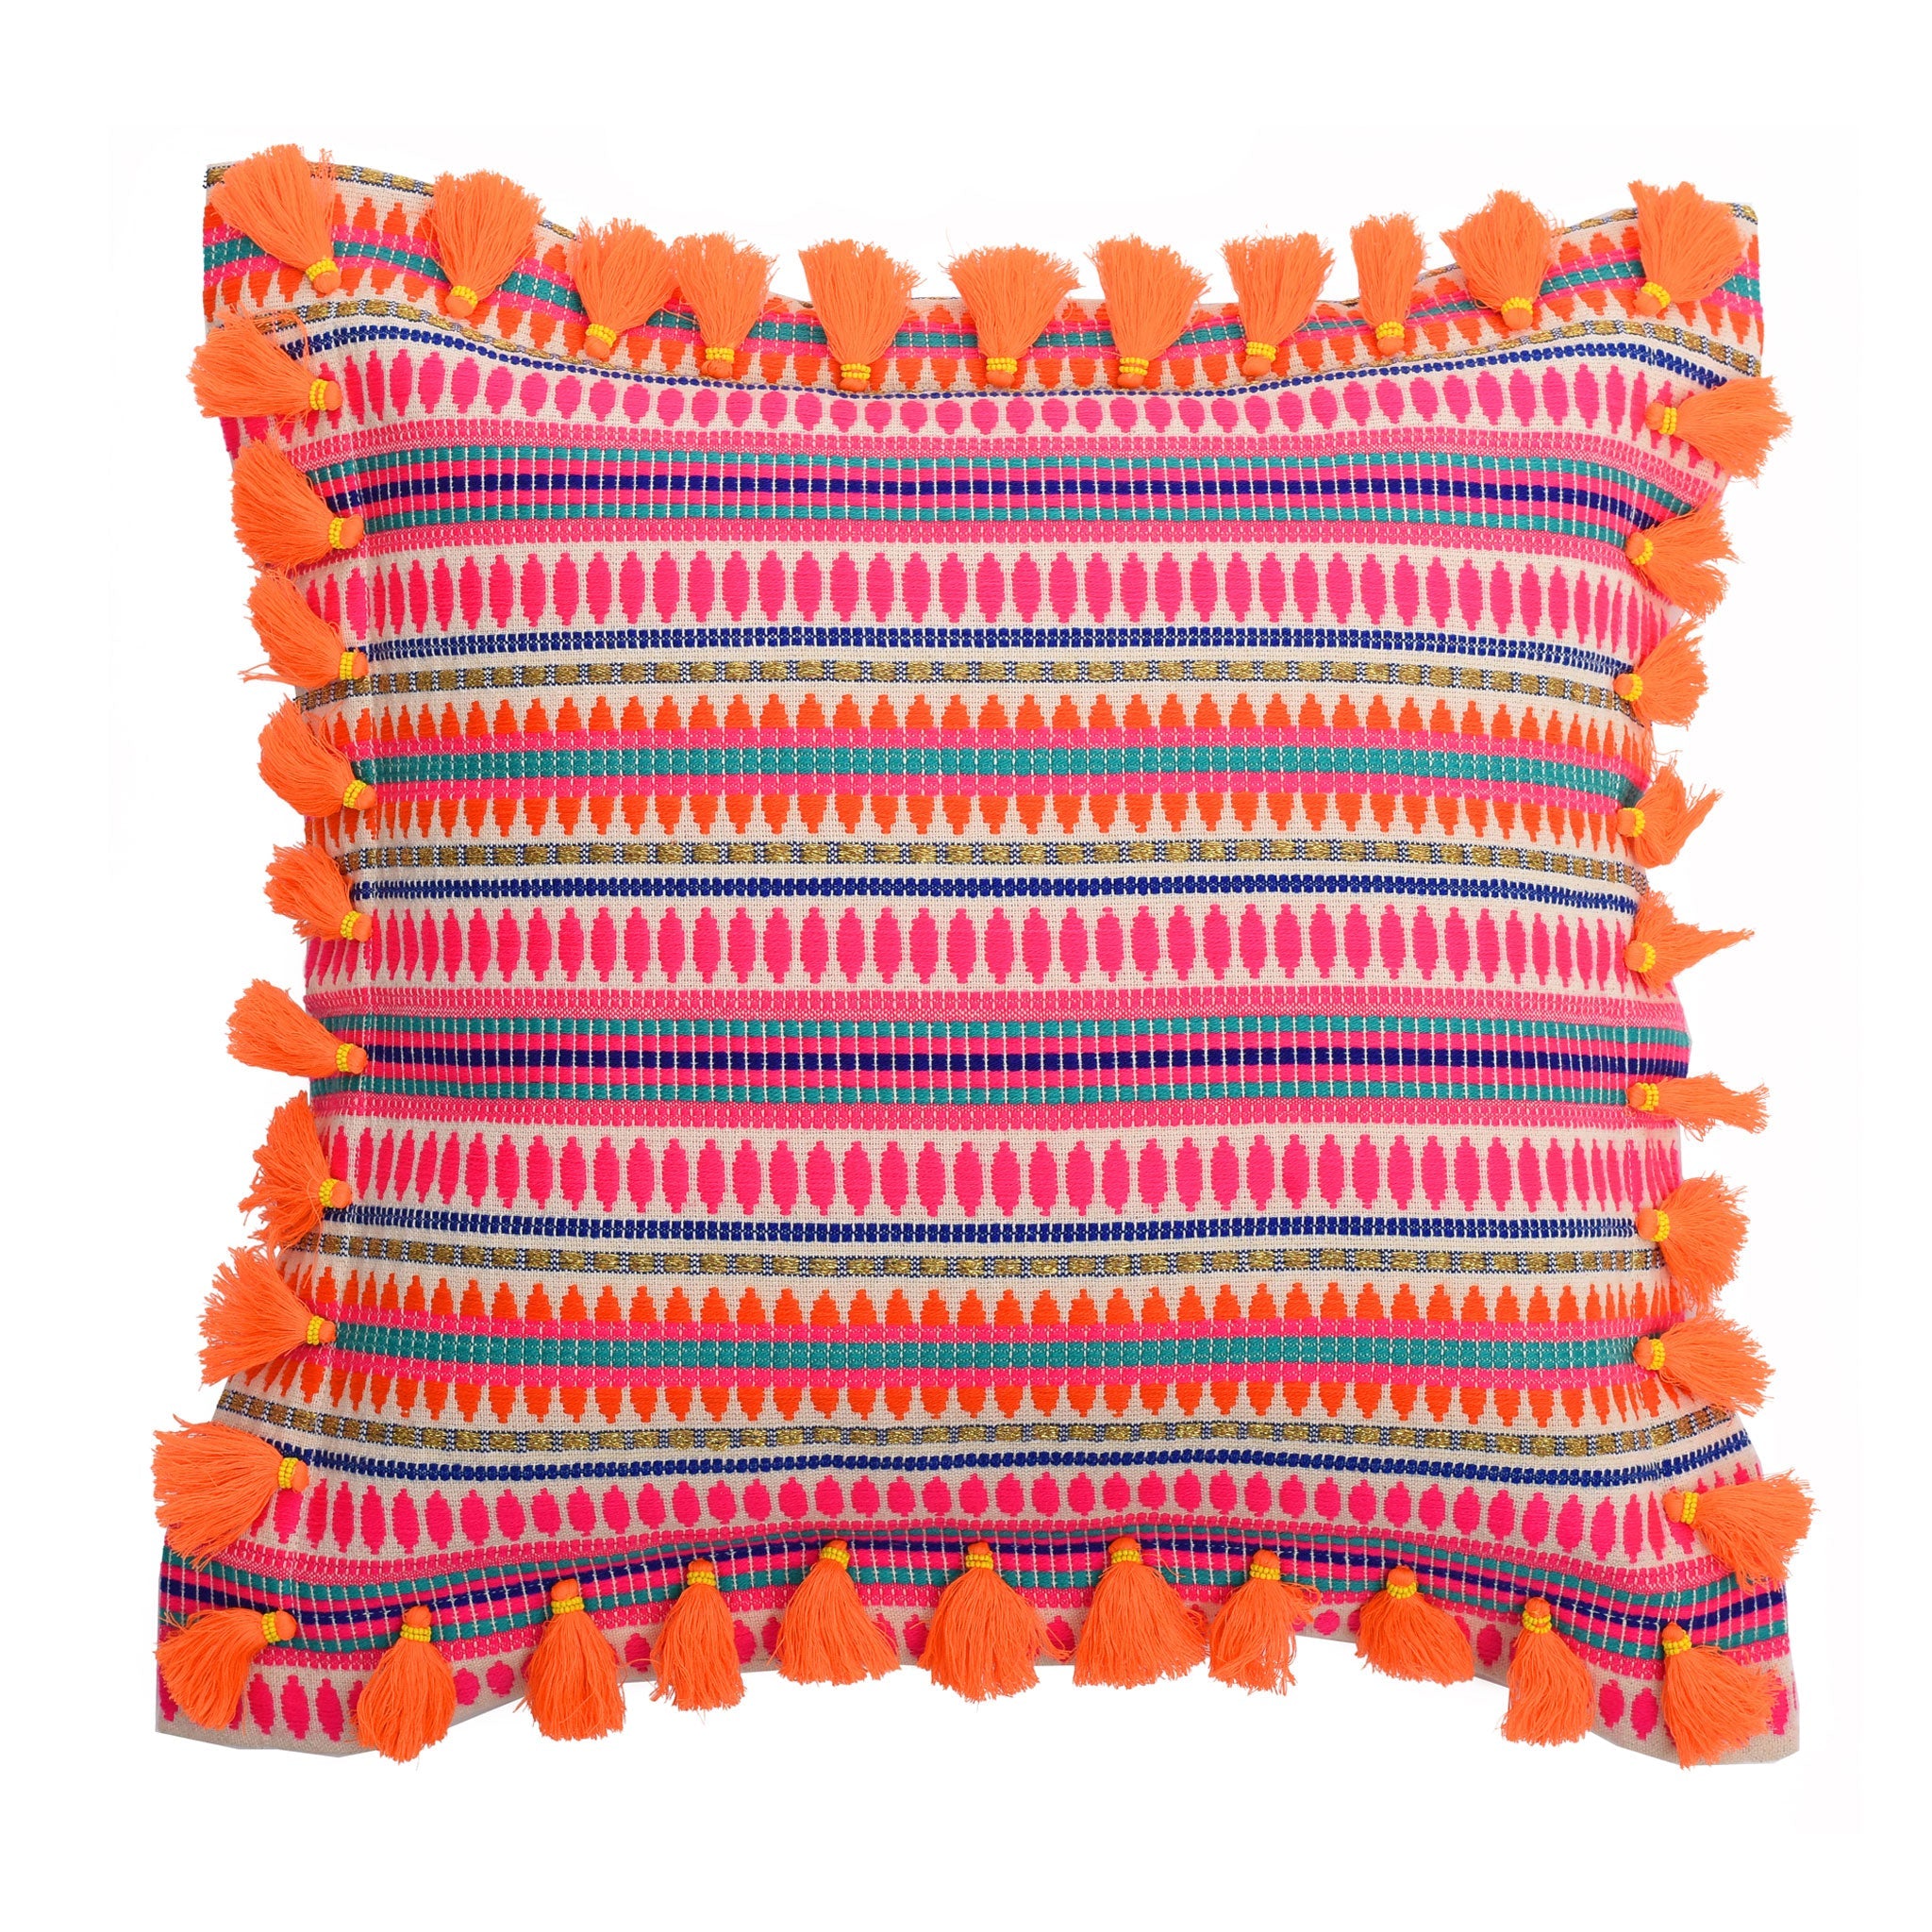 Bedawi Neon Cotton Cushion